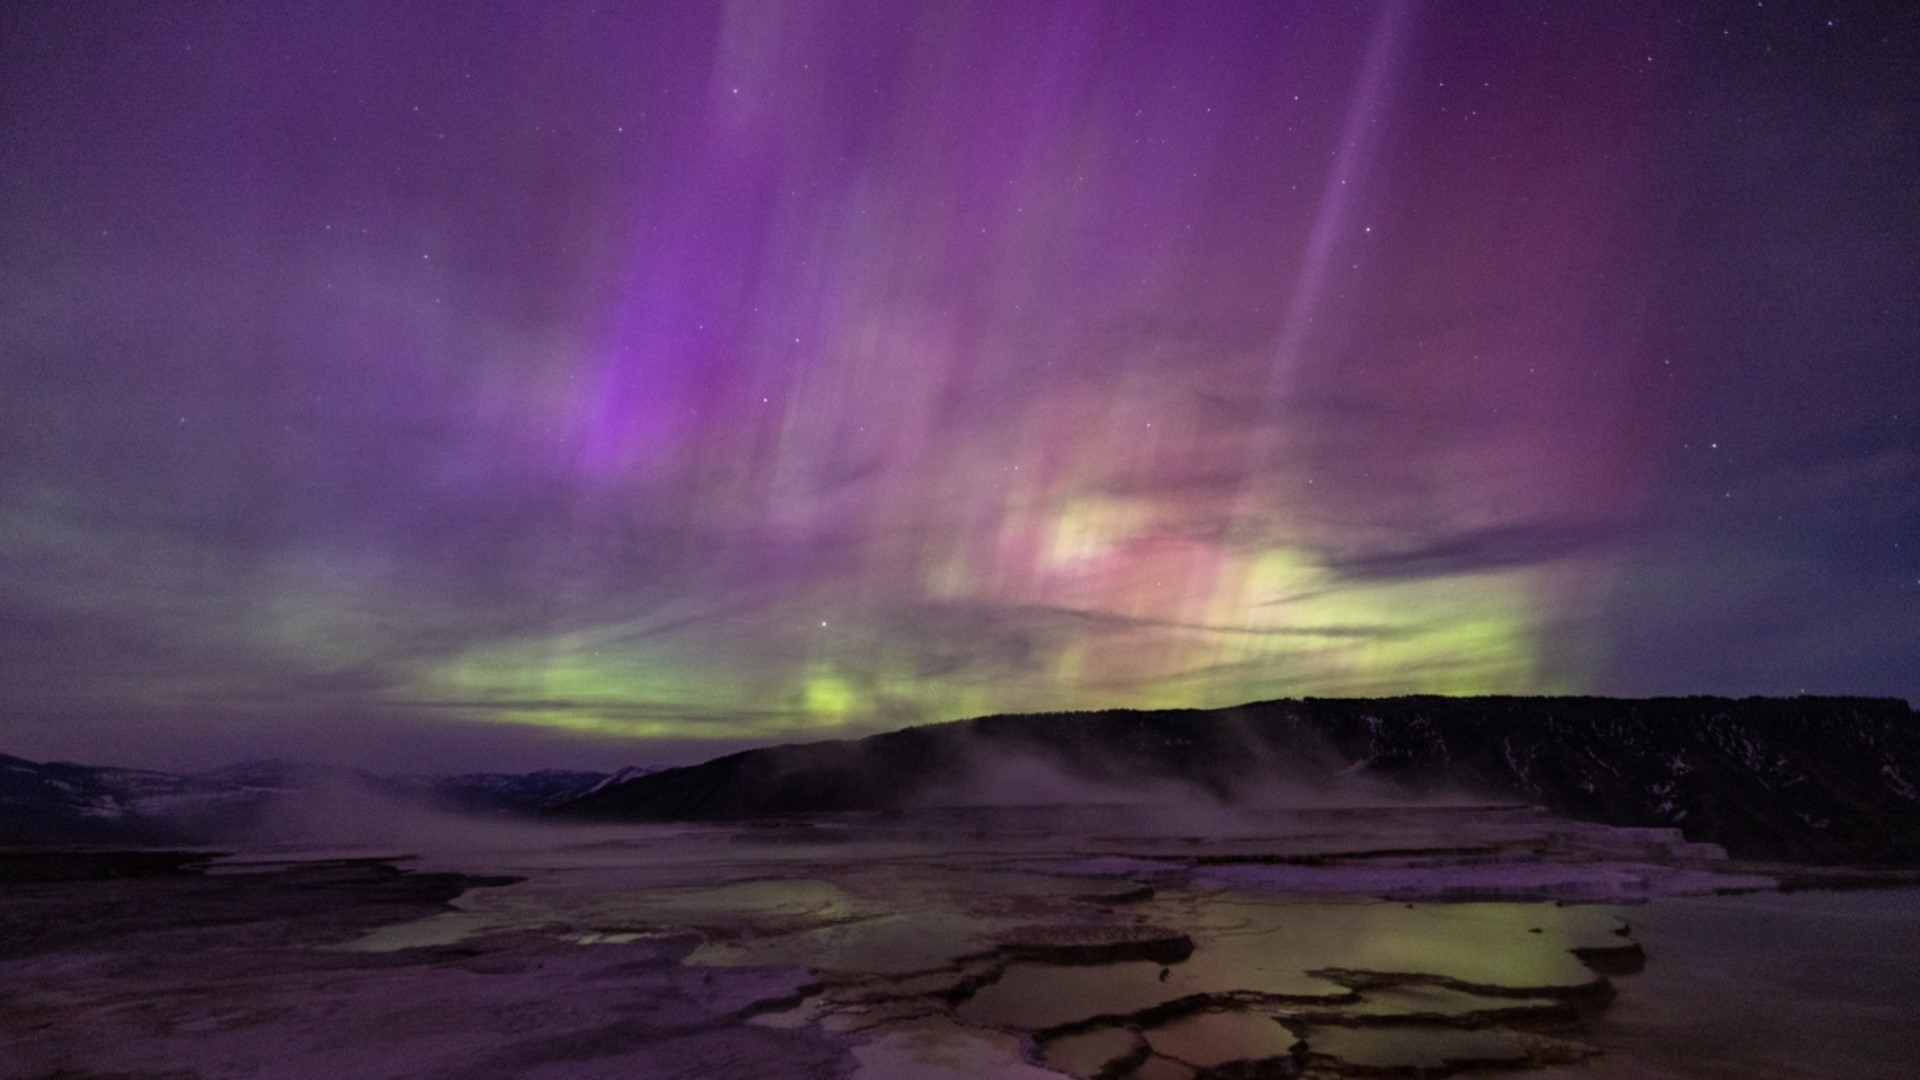 Northern lights dazzle in Yellowstone National Park